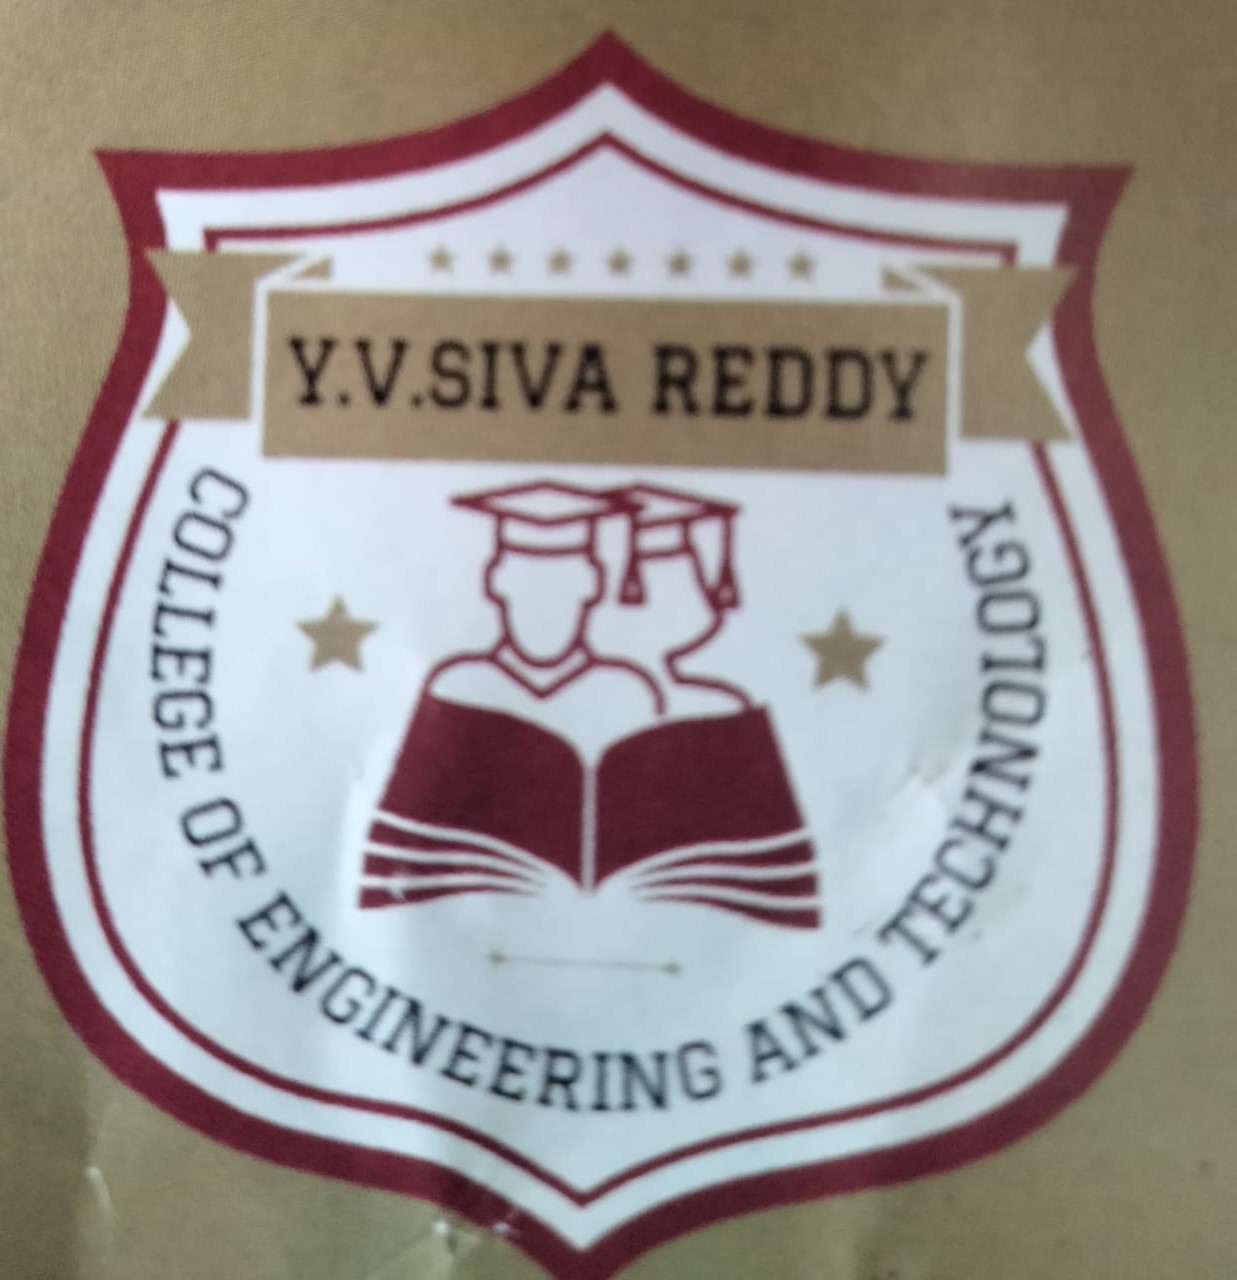 Y. V. SIVAREDDY COLLEGE OF ENGINEERING AND TECHNOLOGY